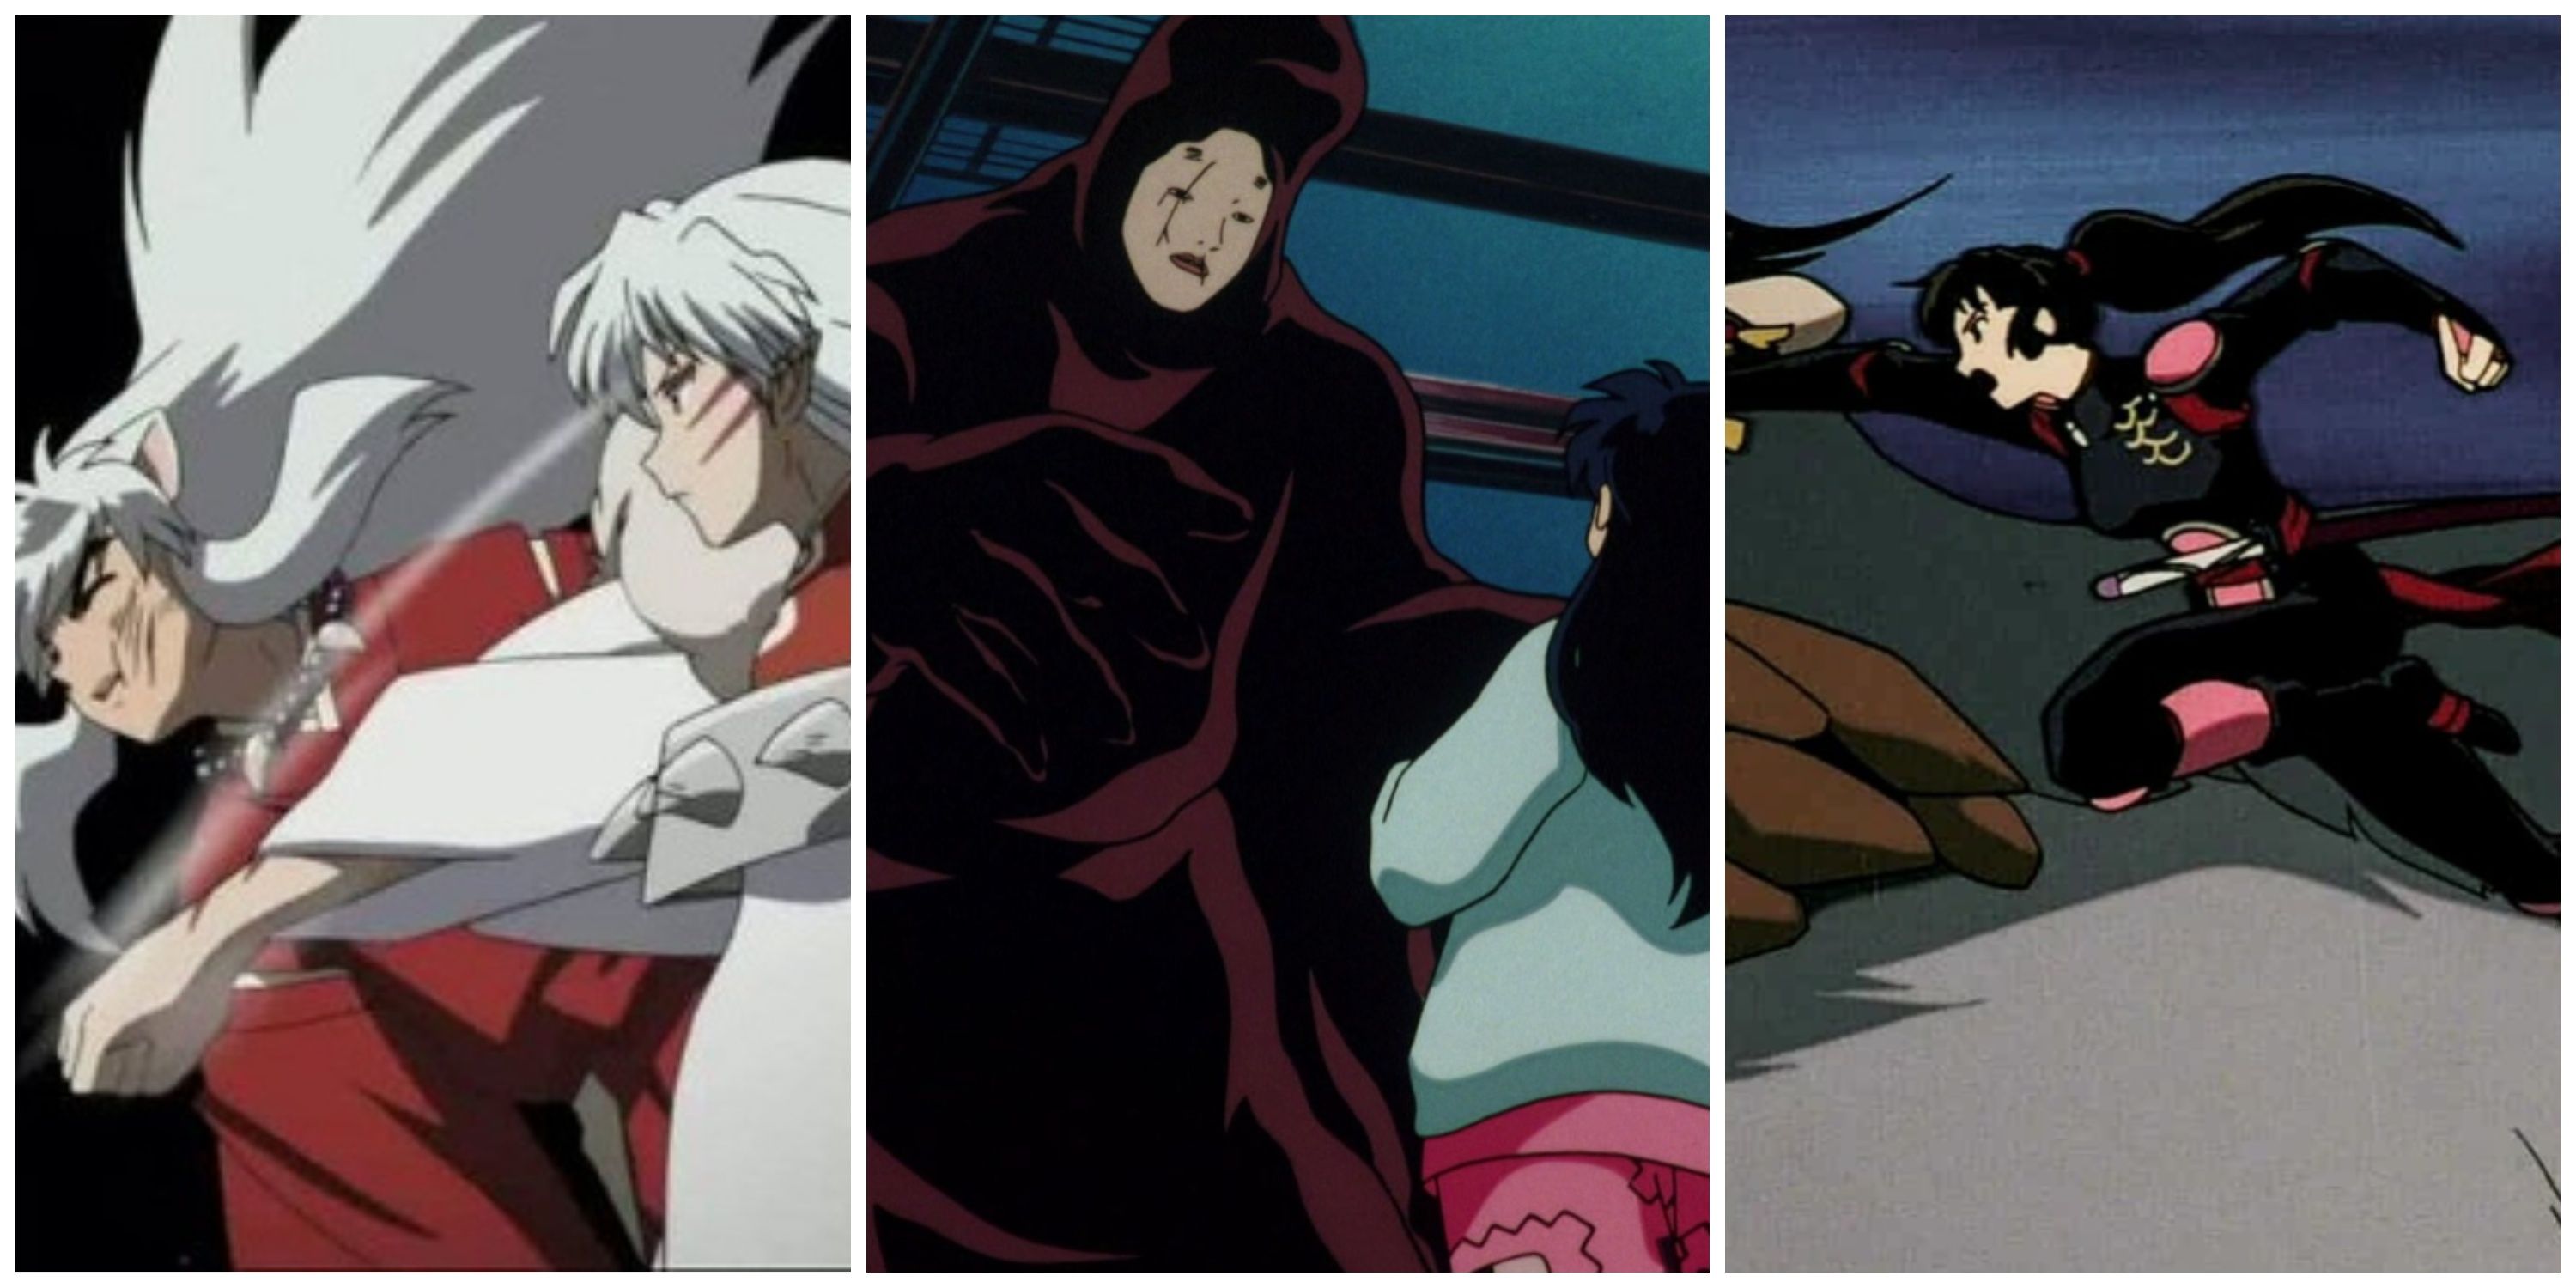 10 Best Anime Episodes Of All Time, According To Reddit